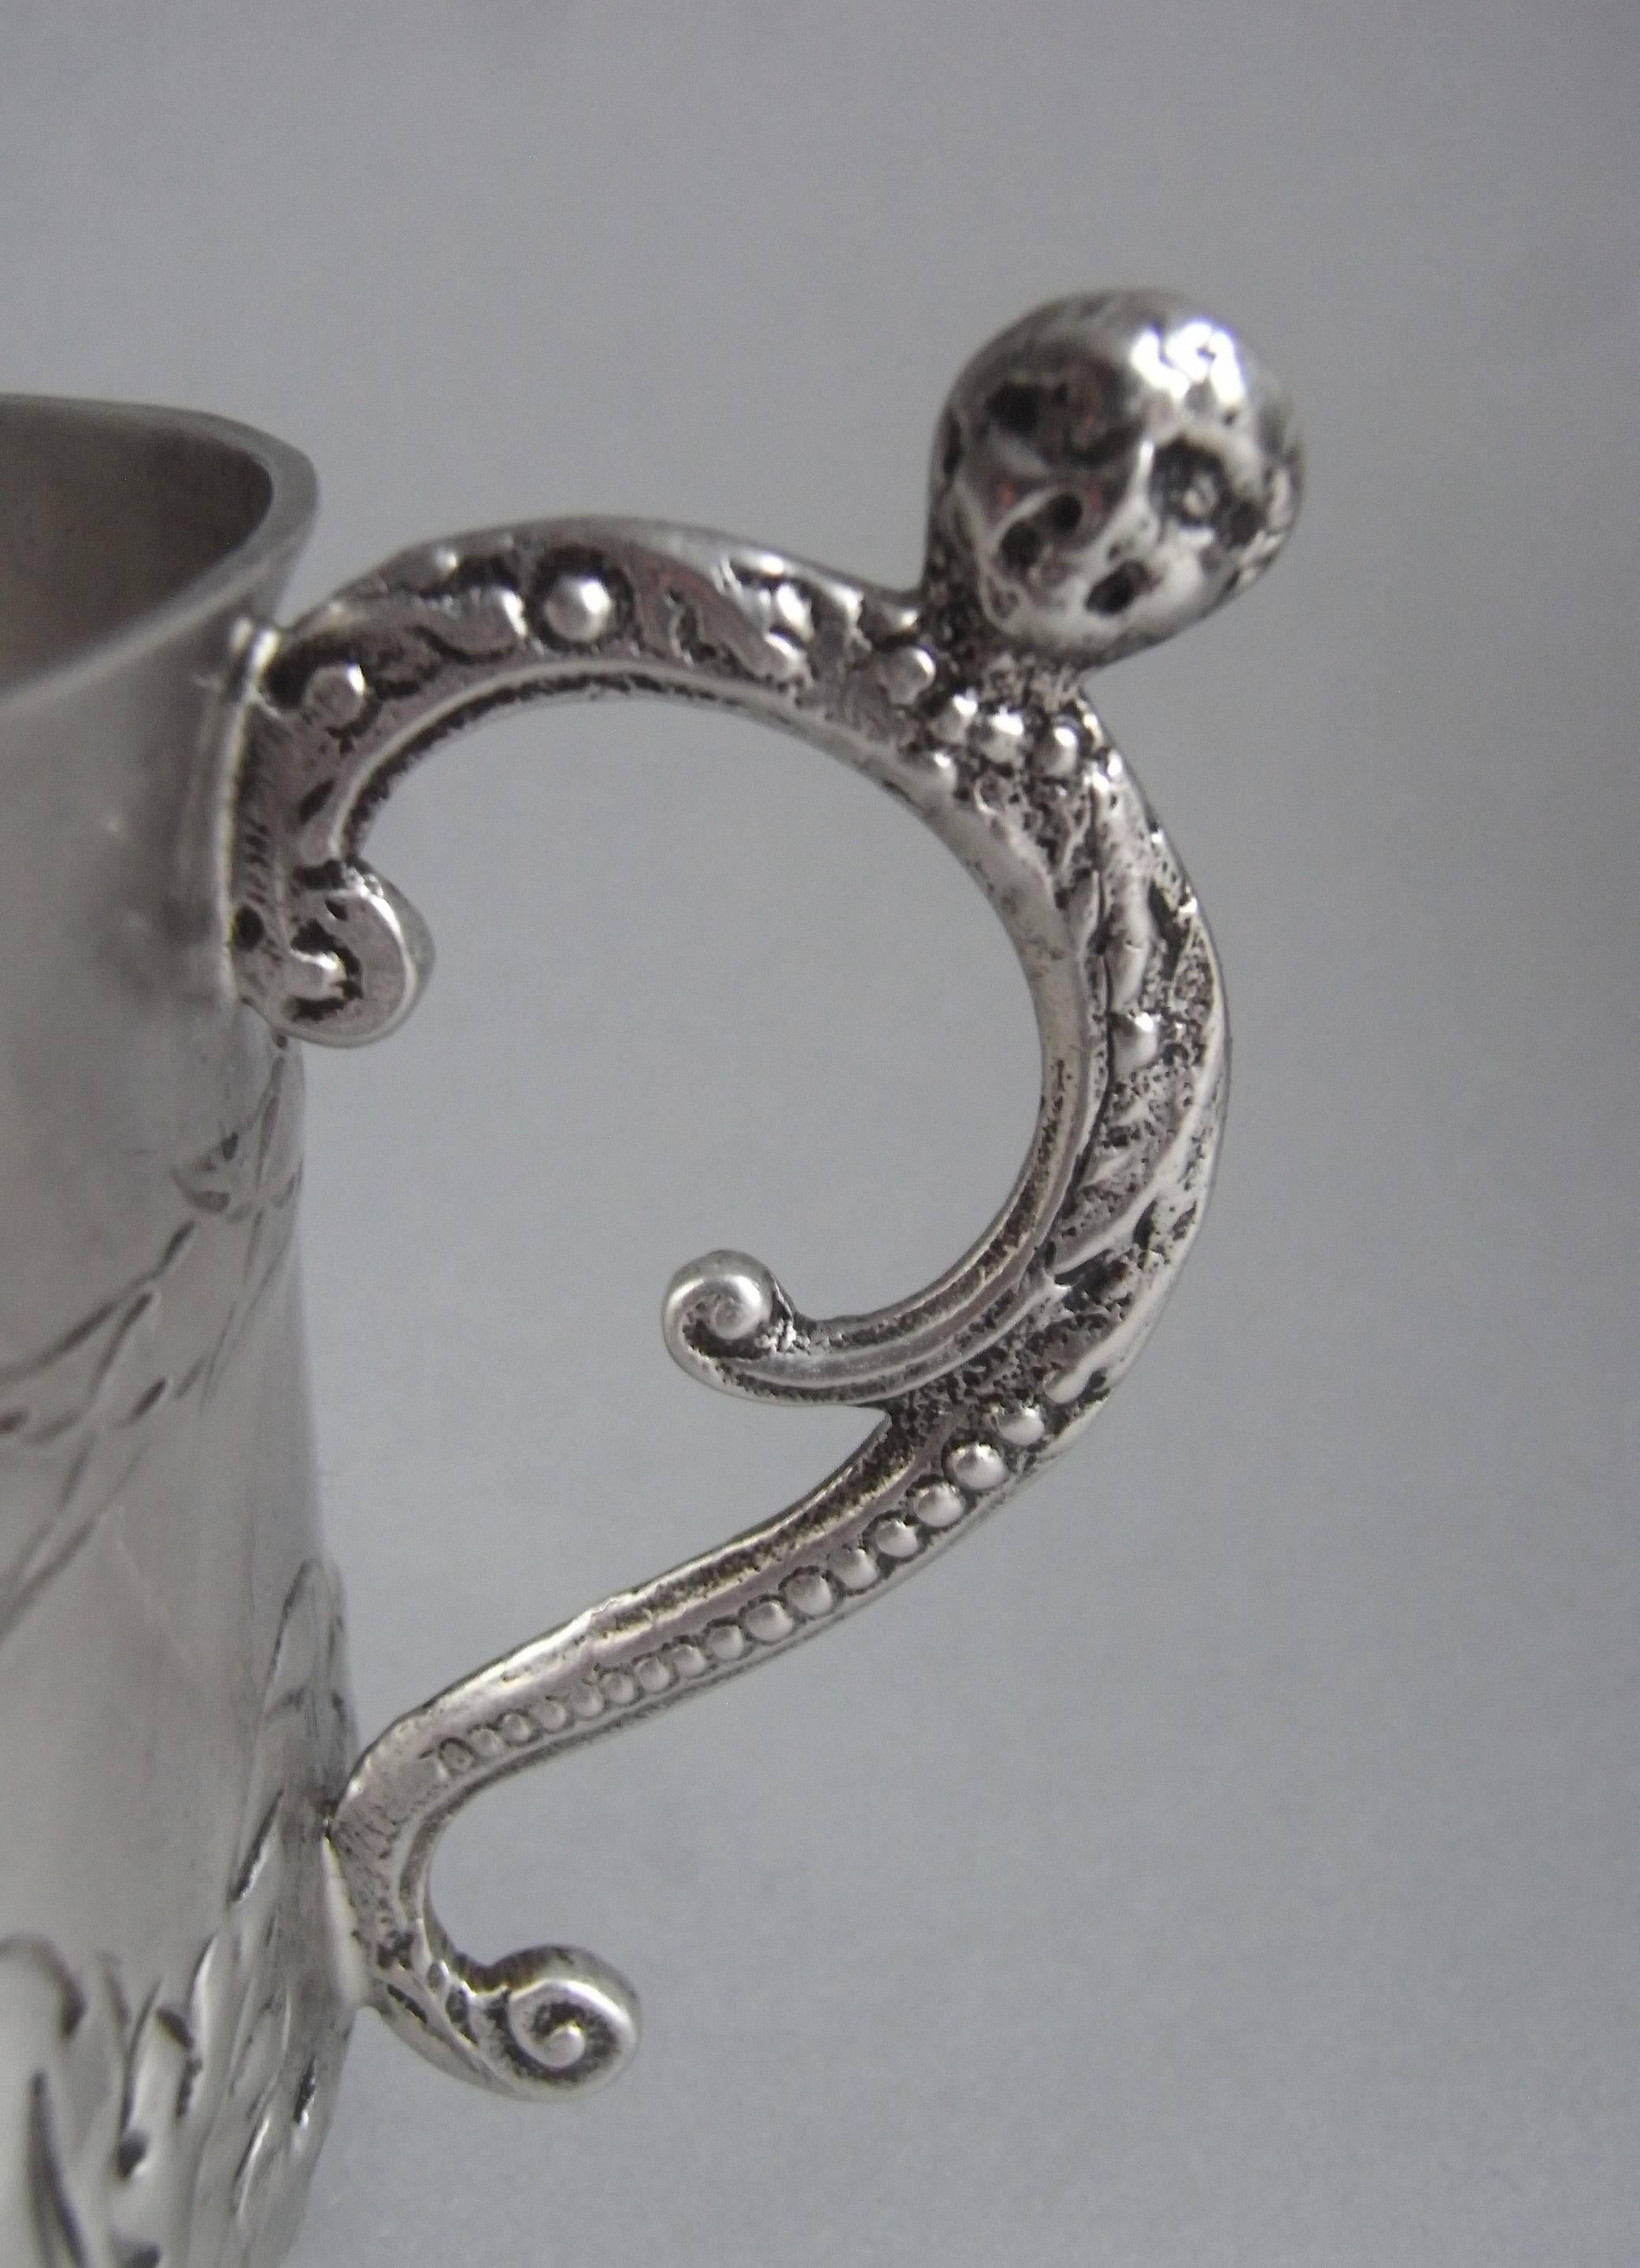 English Fine Charles II Porringer Made in London in 1681 by Francis Singleton